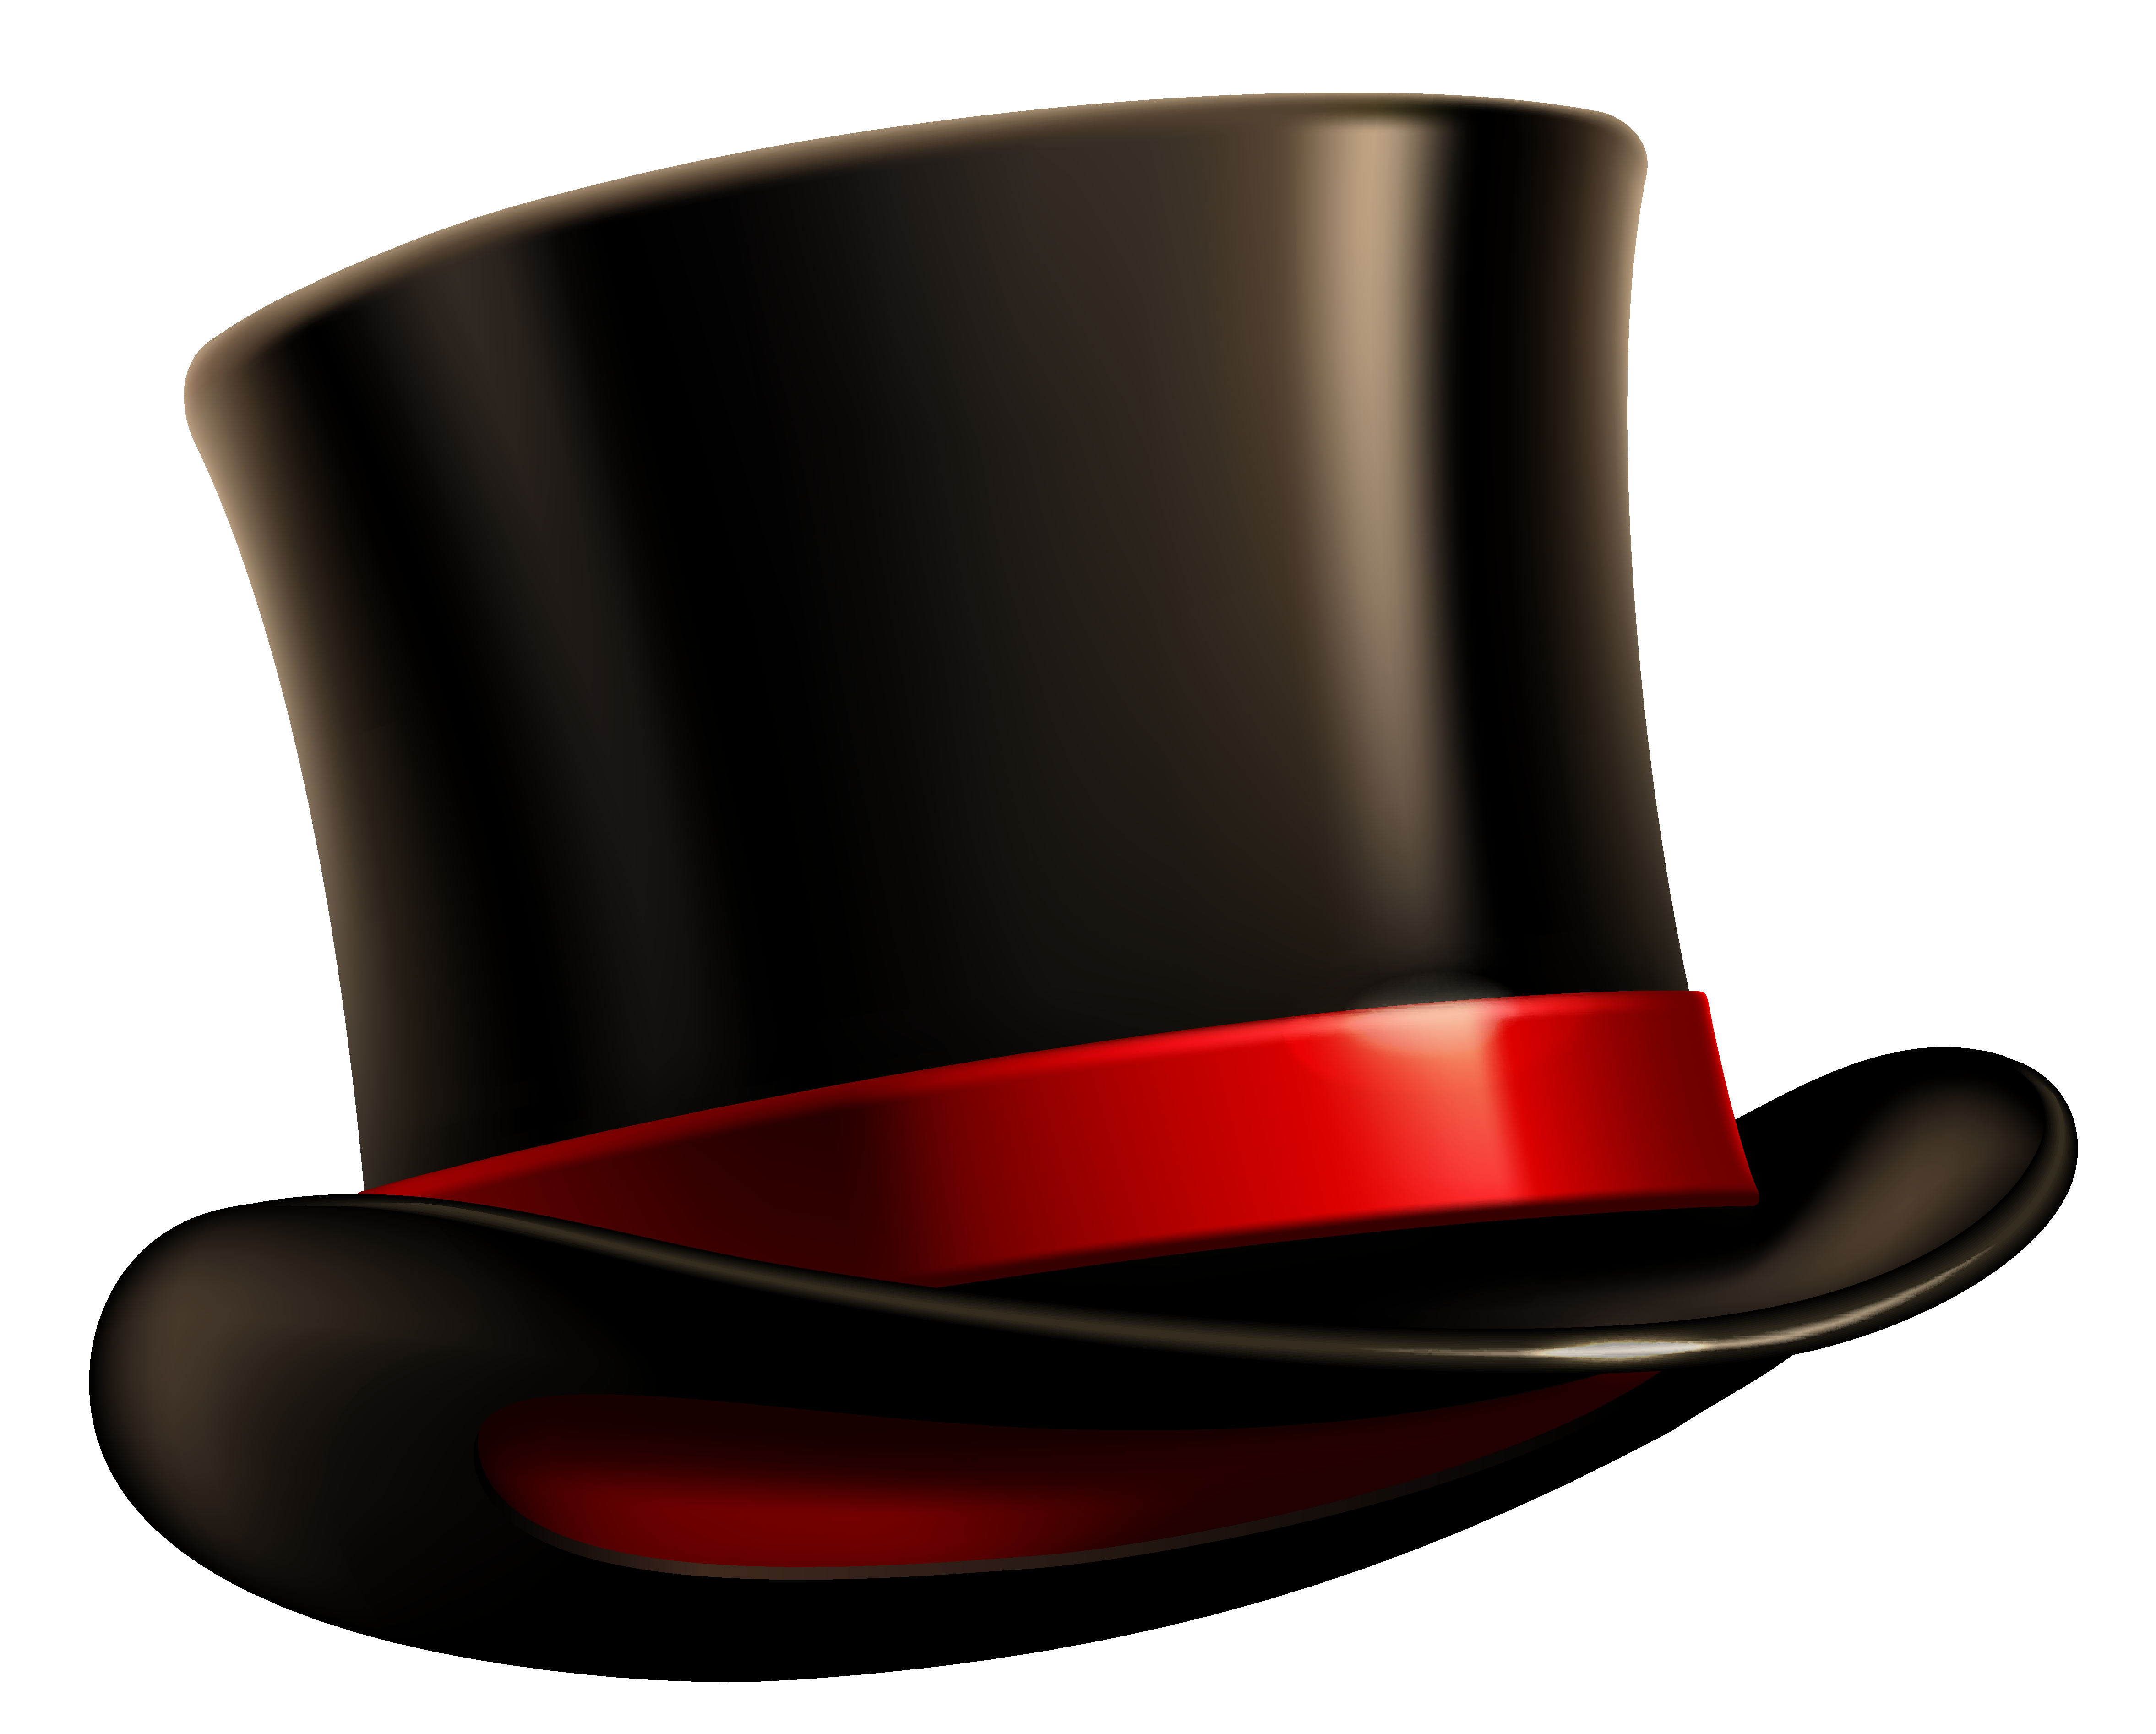 Free Magic Hat Png, Download Free Clip Art, Free Clip Art on.